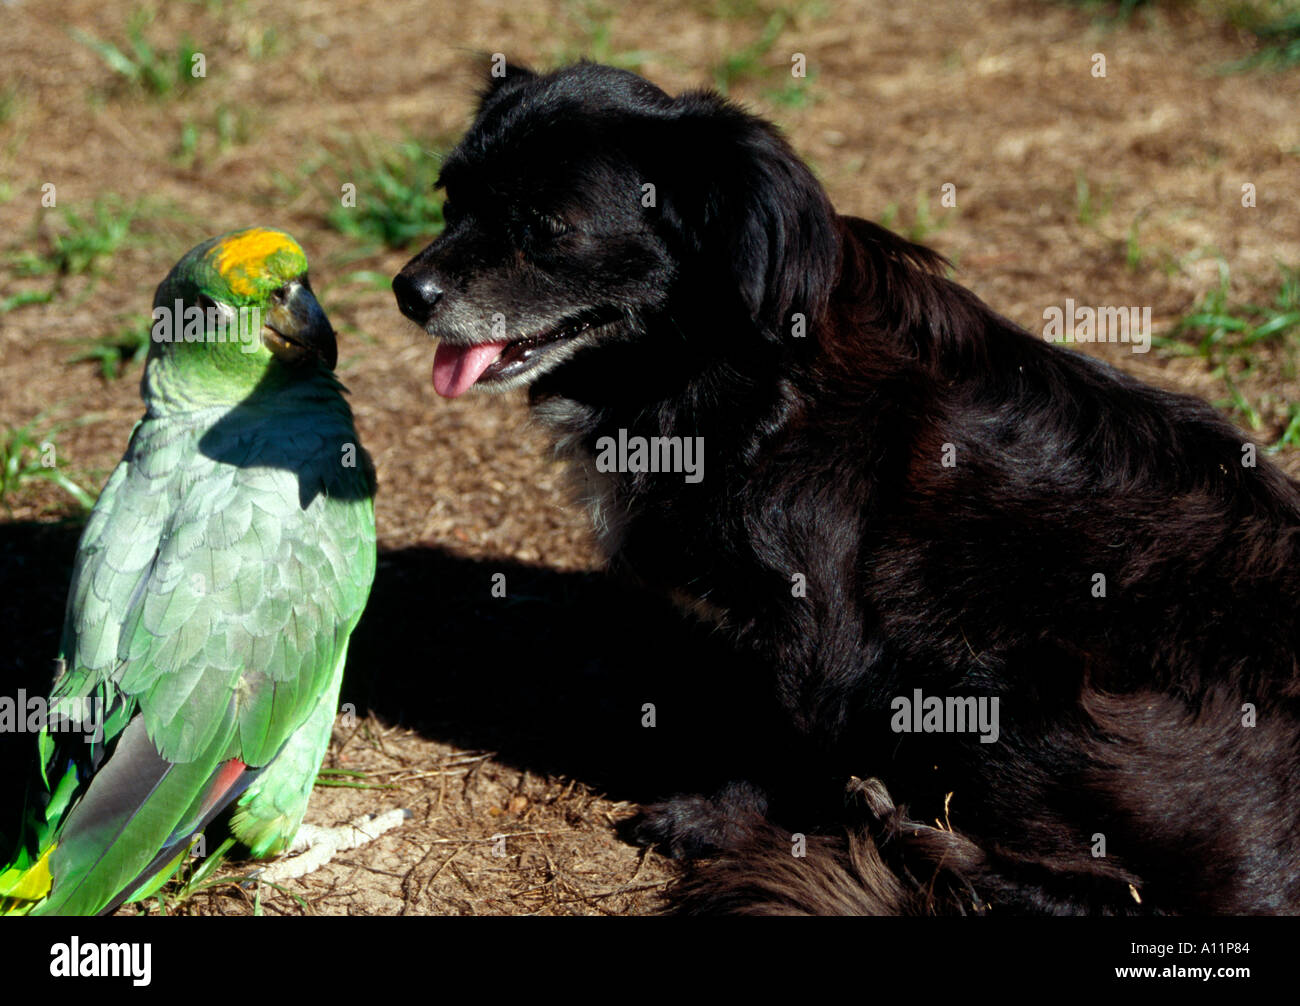 Unlikely friends Green parrot and dog Venezuela. Stock Photo